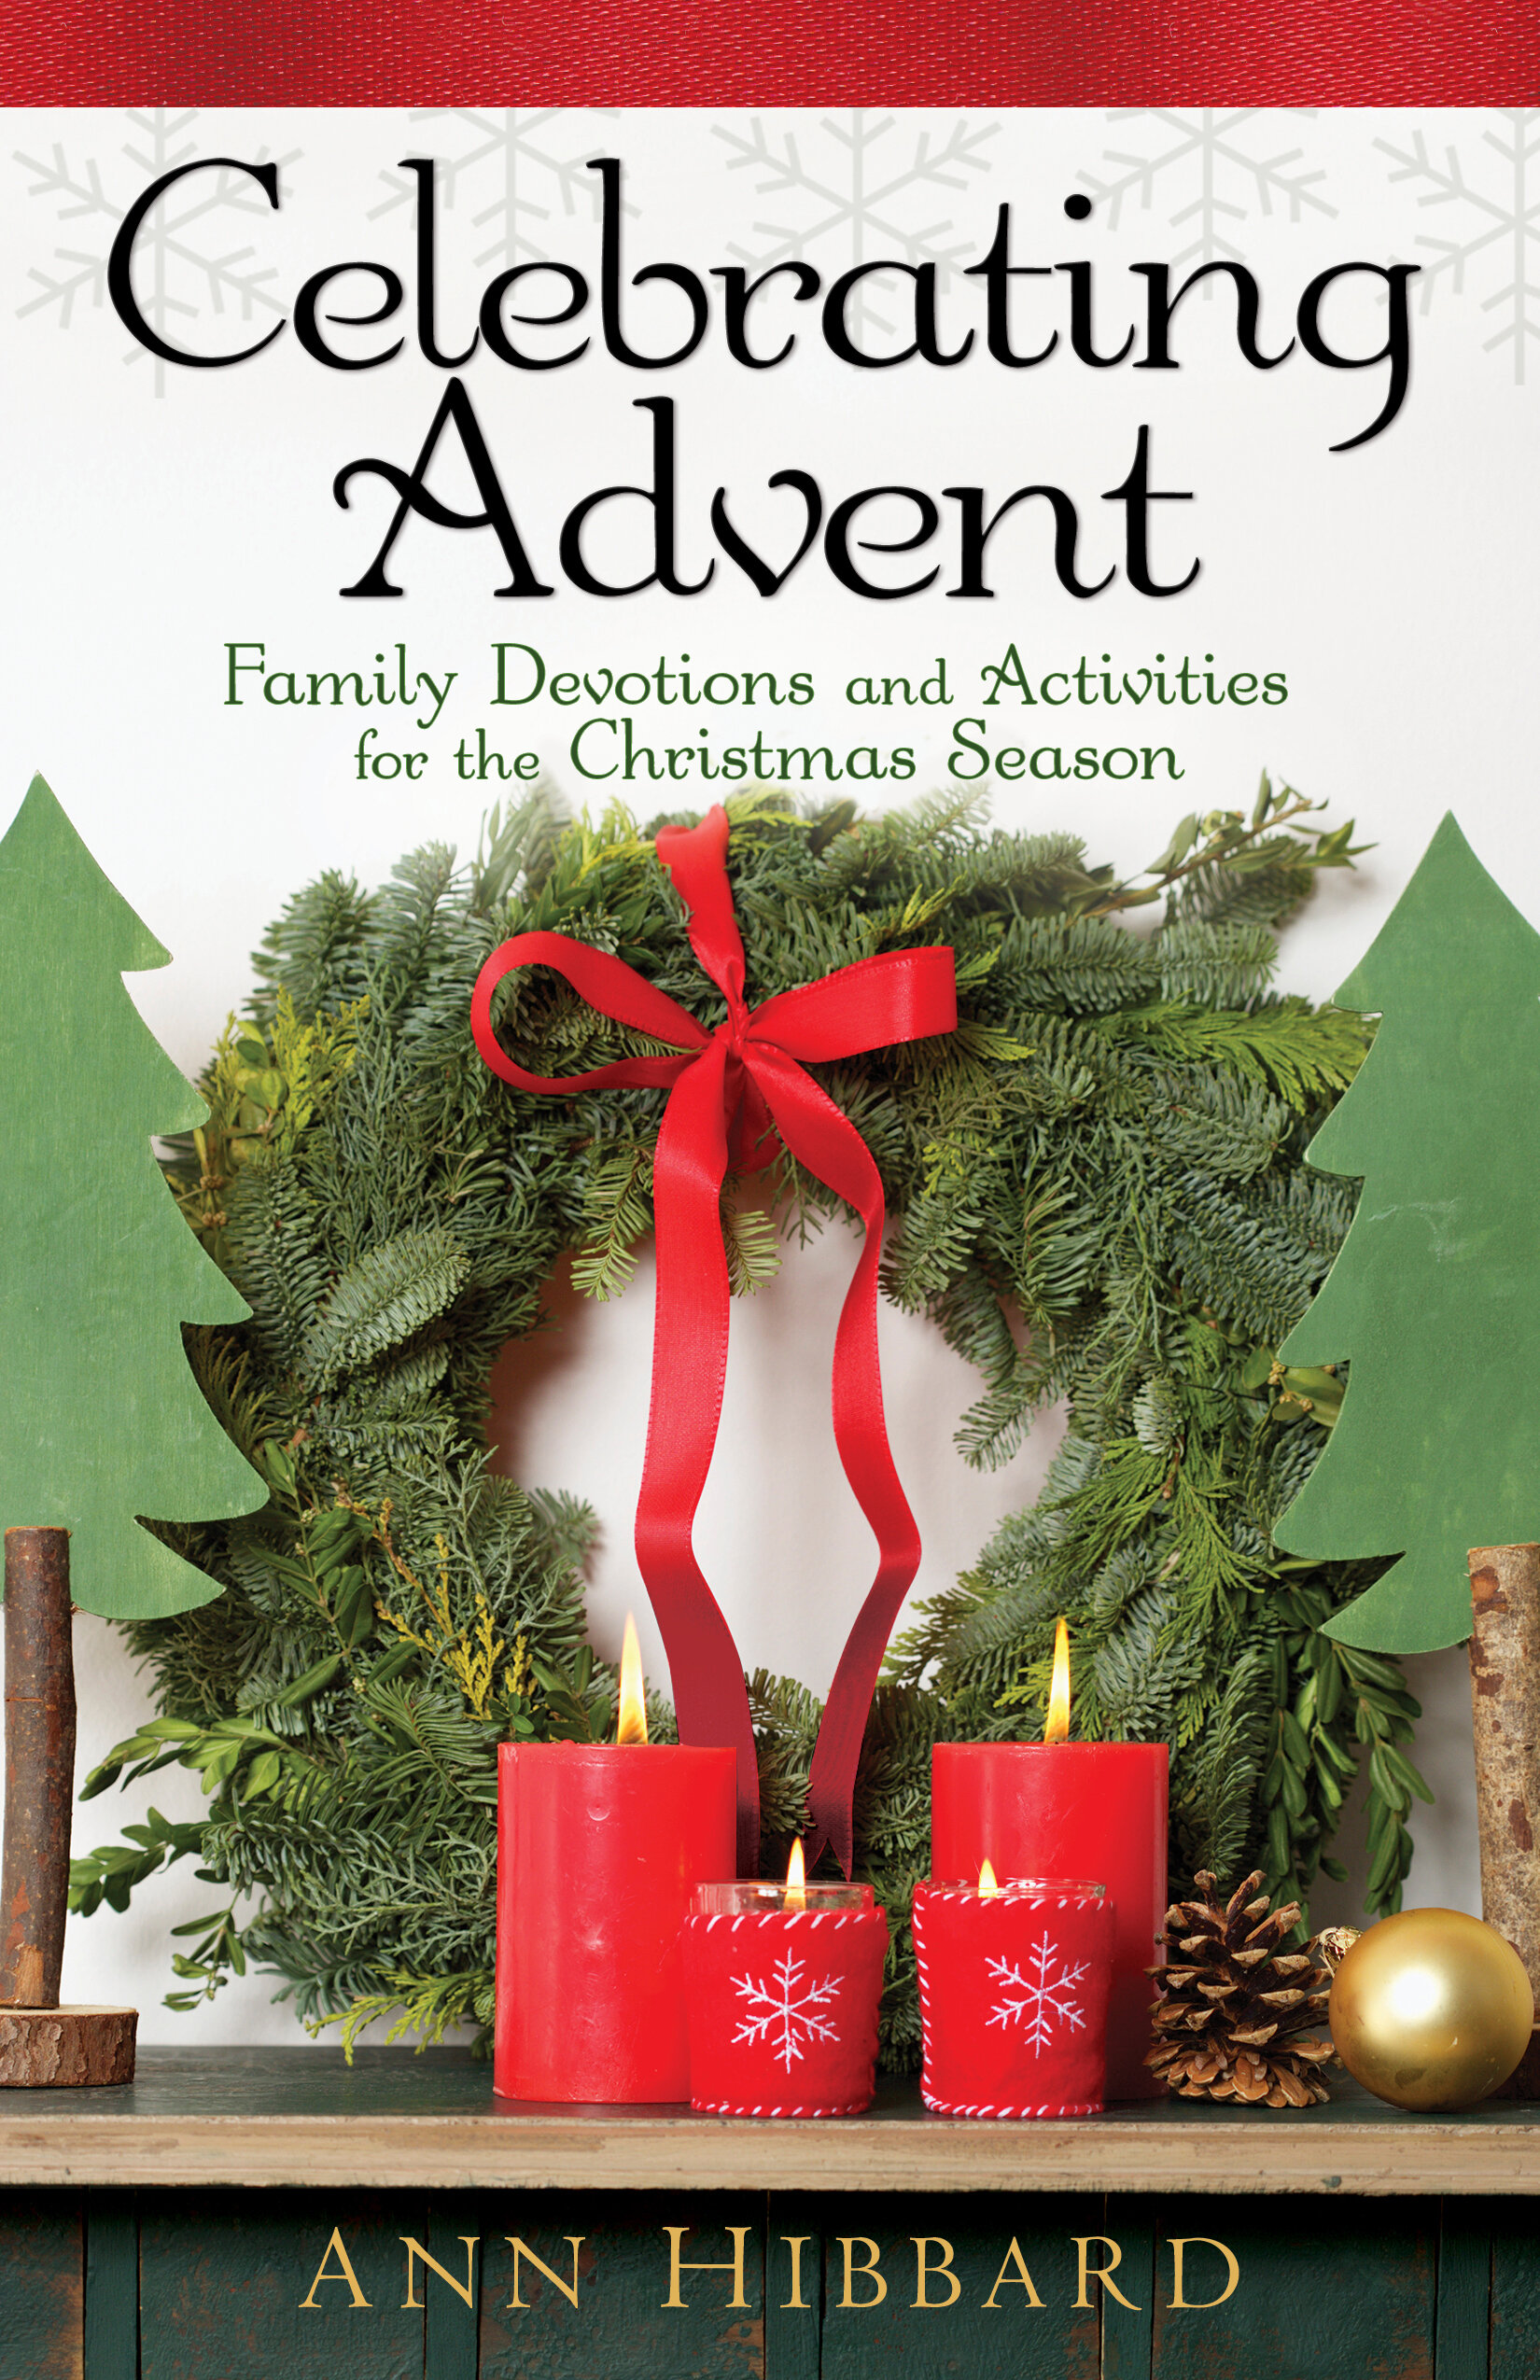 Celebrating Advent: Family Devotions and Activities for the Christmas Season